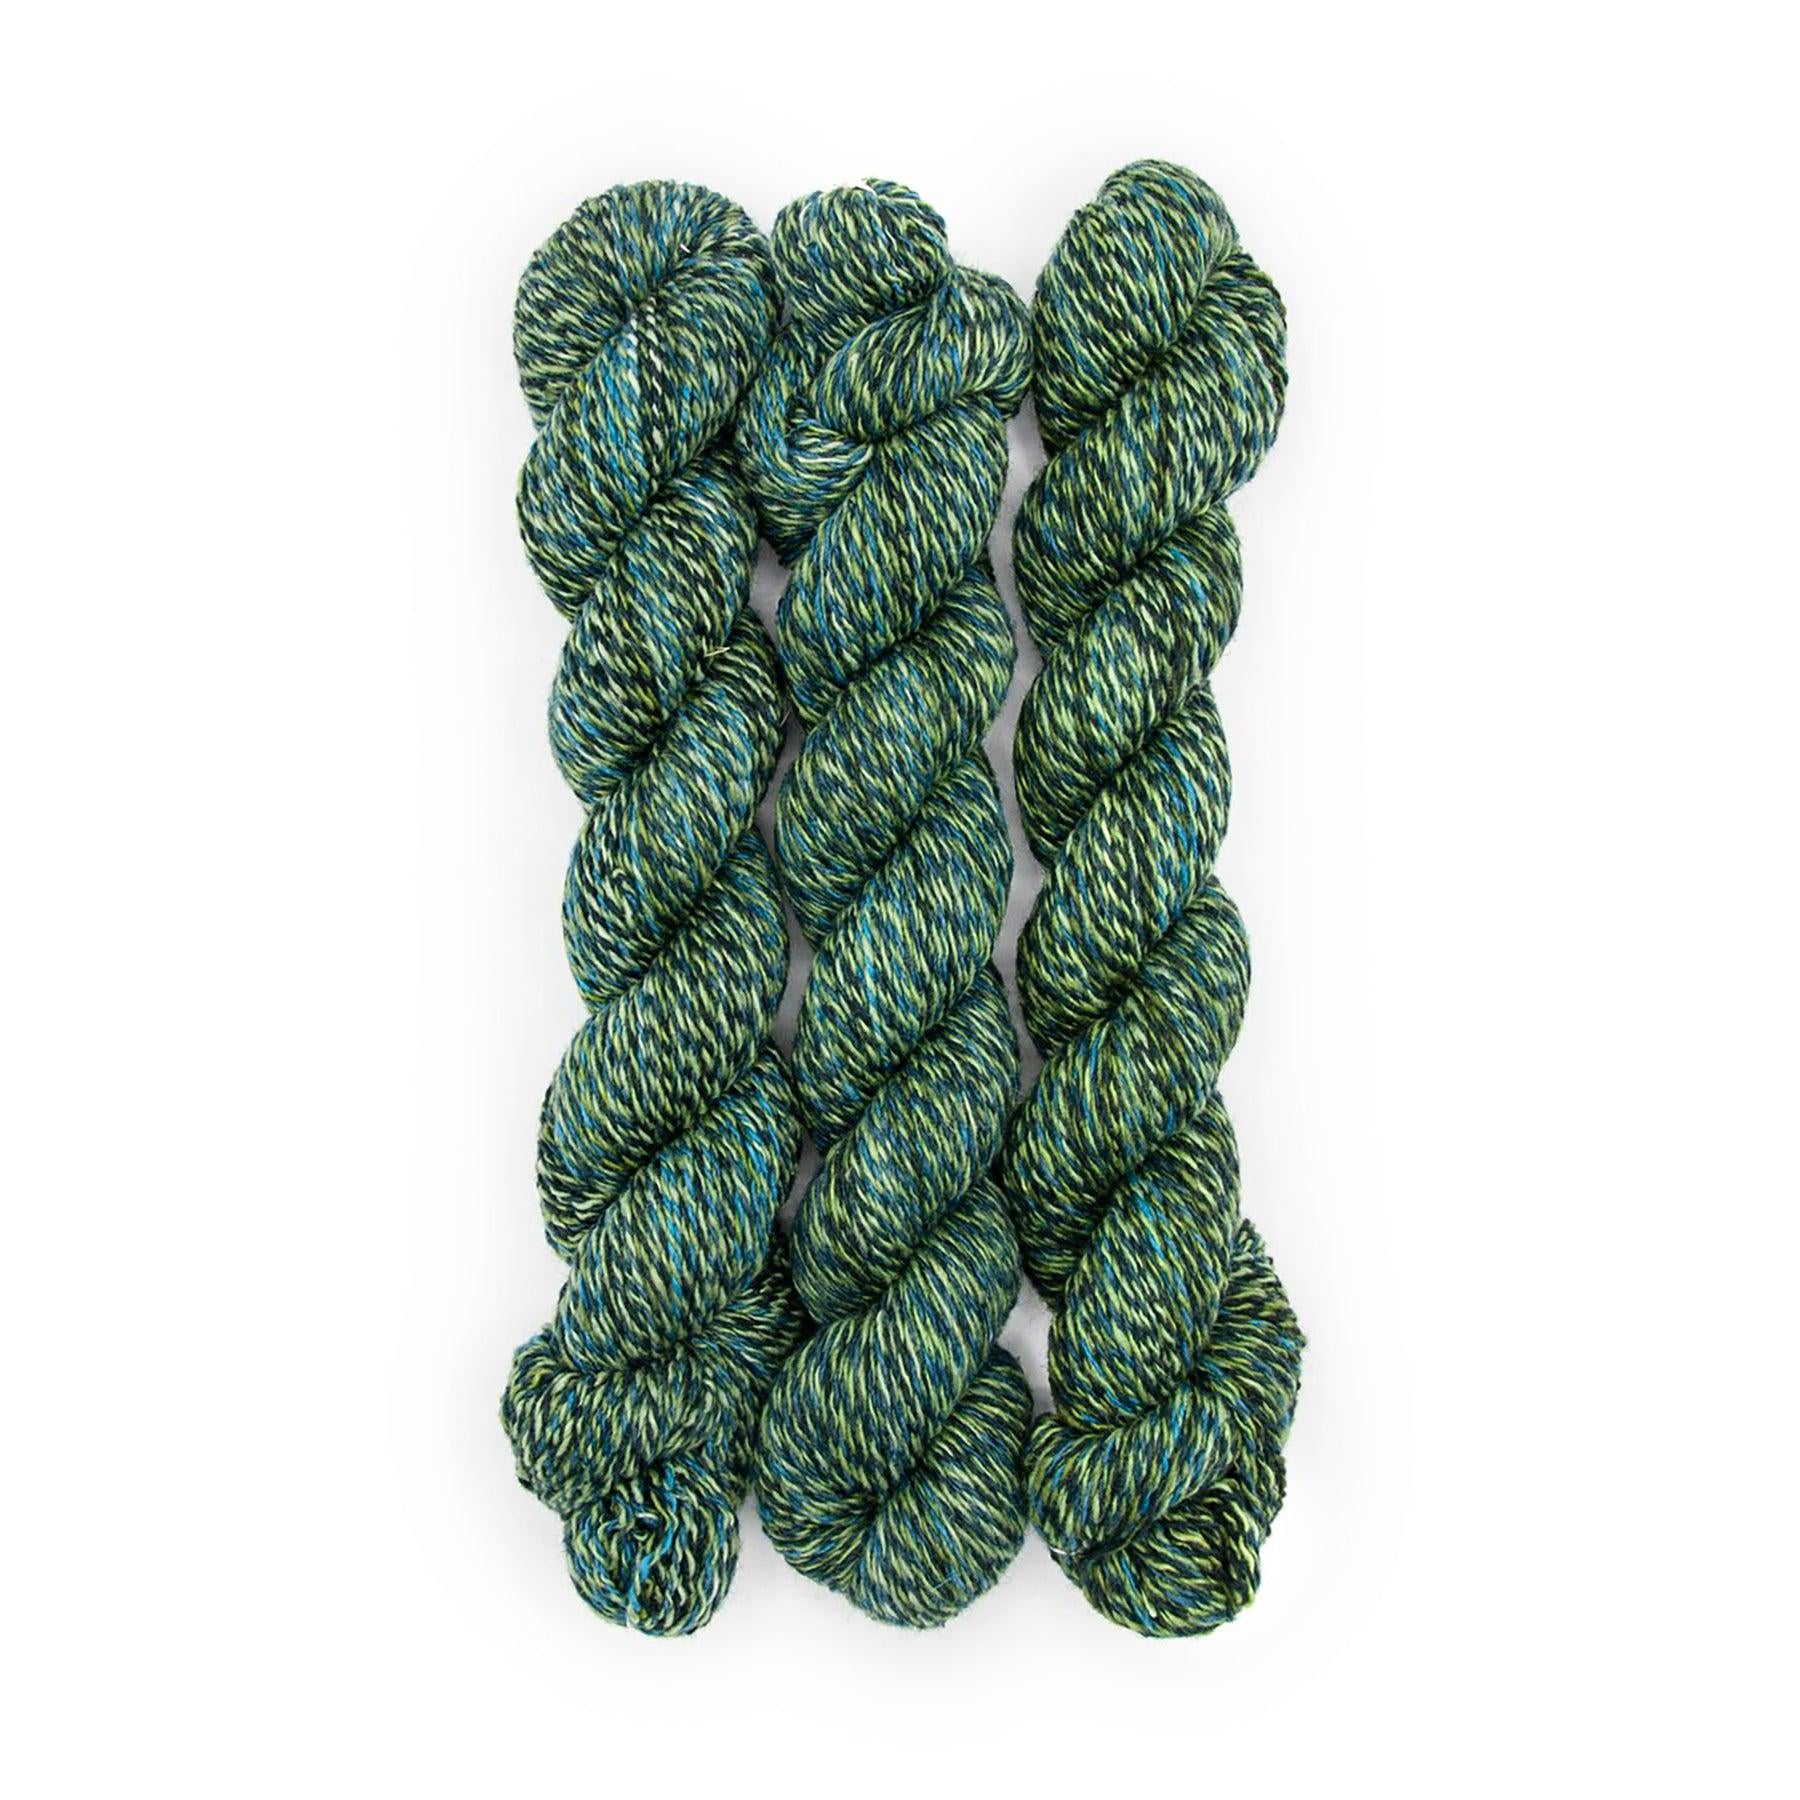 Plied Yarn North Ave Tree Baltimore a marled yarn with moss green, navy, bright blue and black colors. 